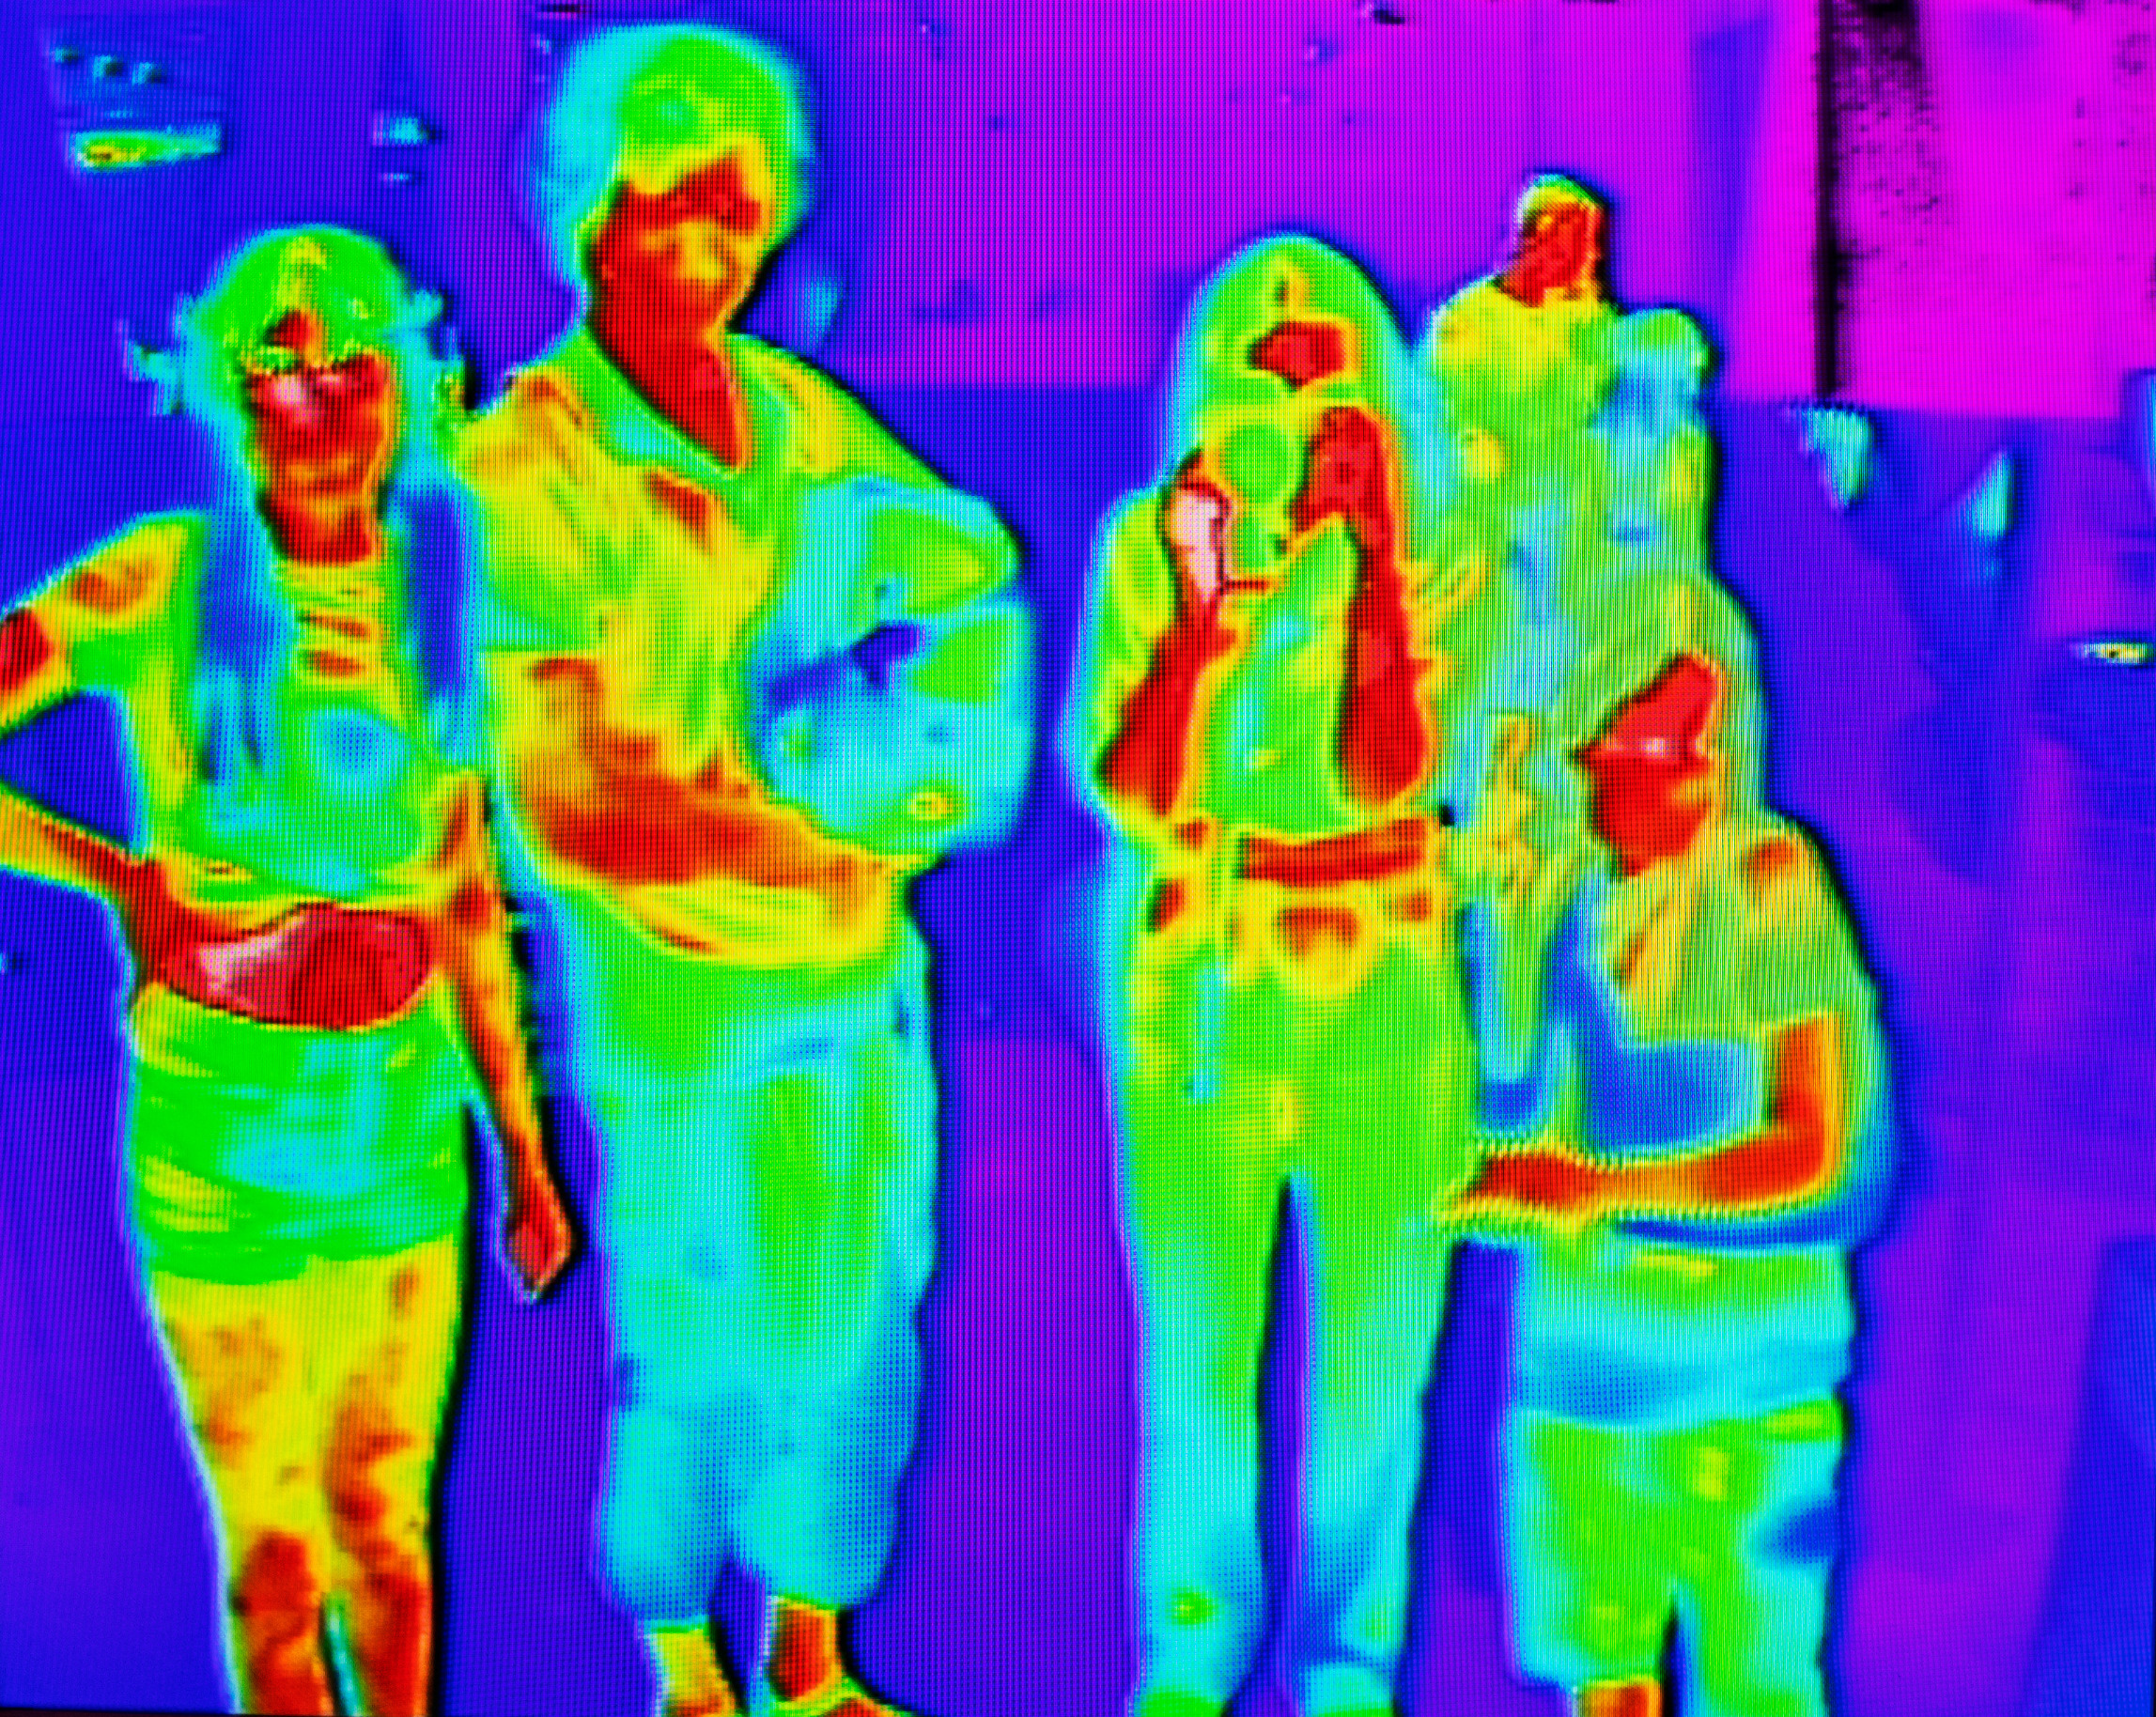 Lincs Thermal Imaging by WA Designs